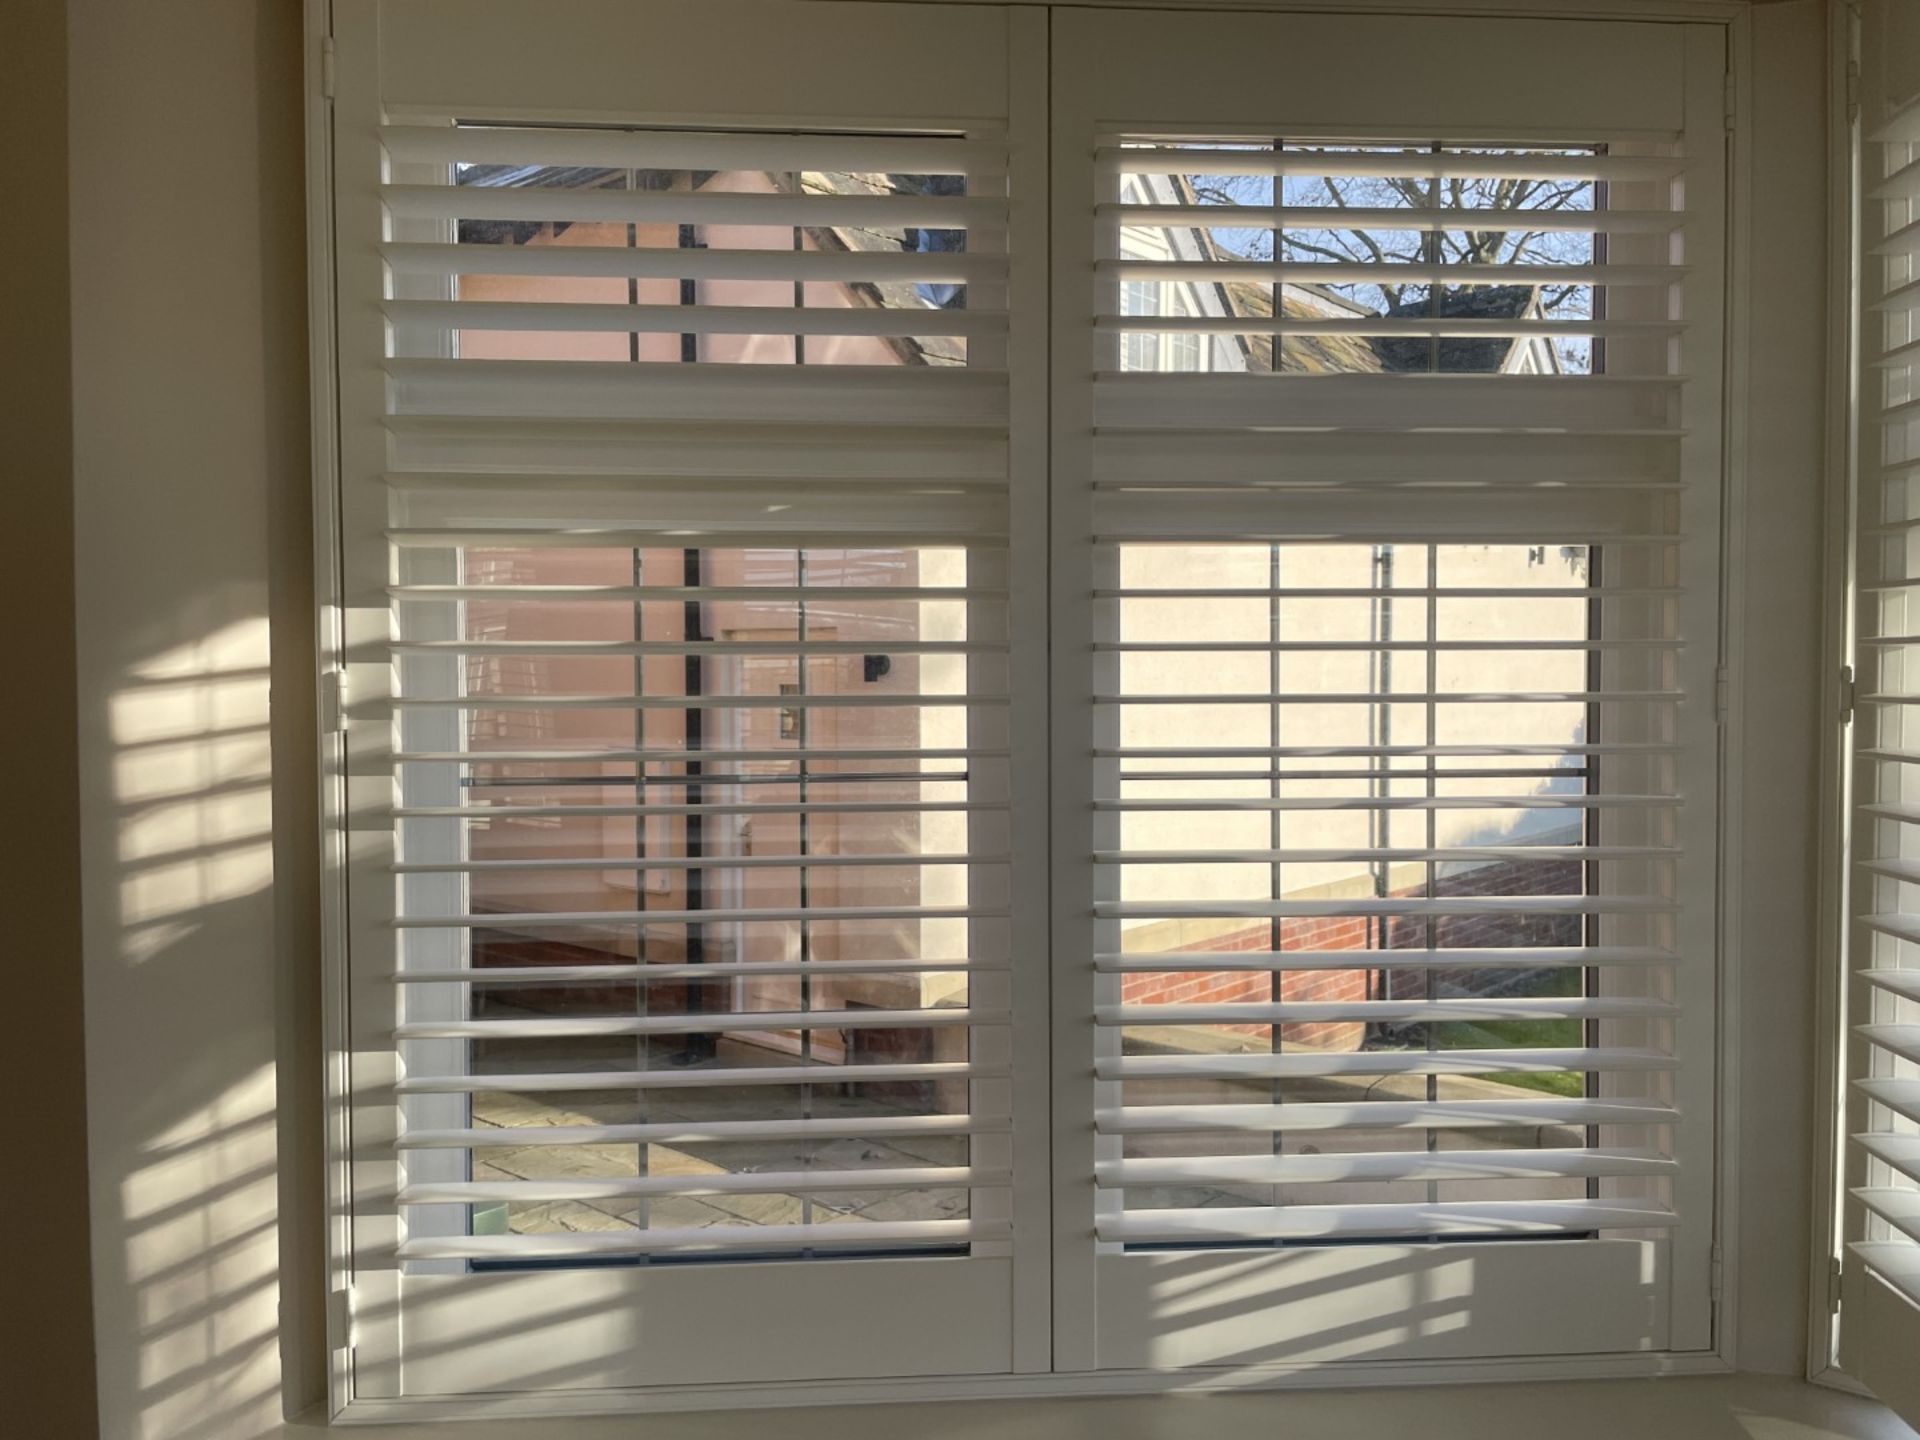 1 x Hardwood Timber Double Glazed Window Frames fitted with Shutter Blinds, In White - Image 4 of 24